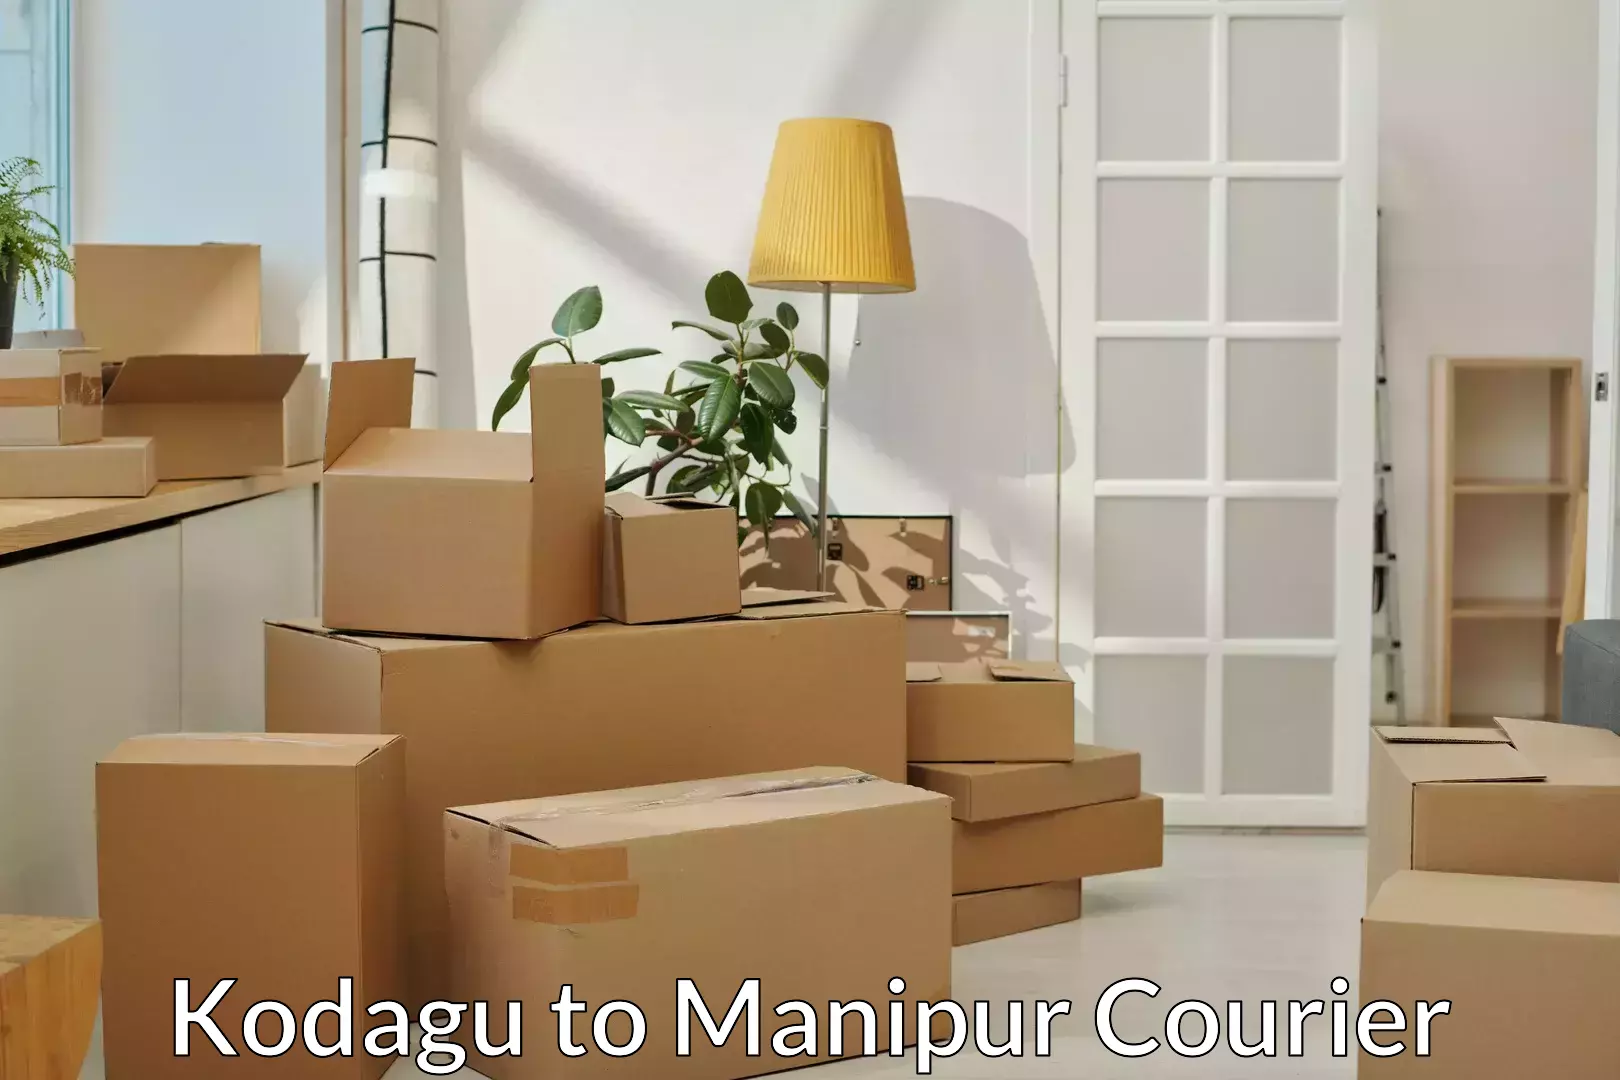 Trusted relocation experts Kodagu to Manipur